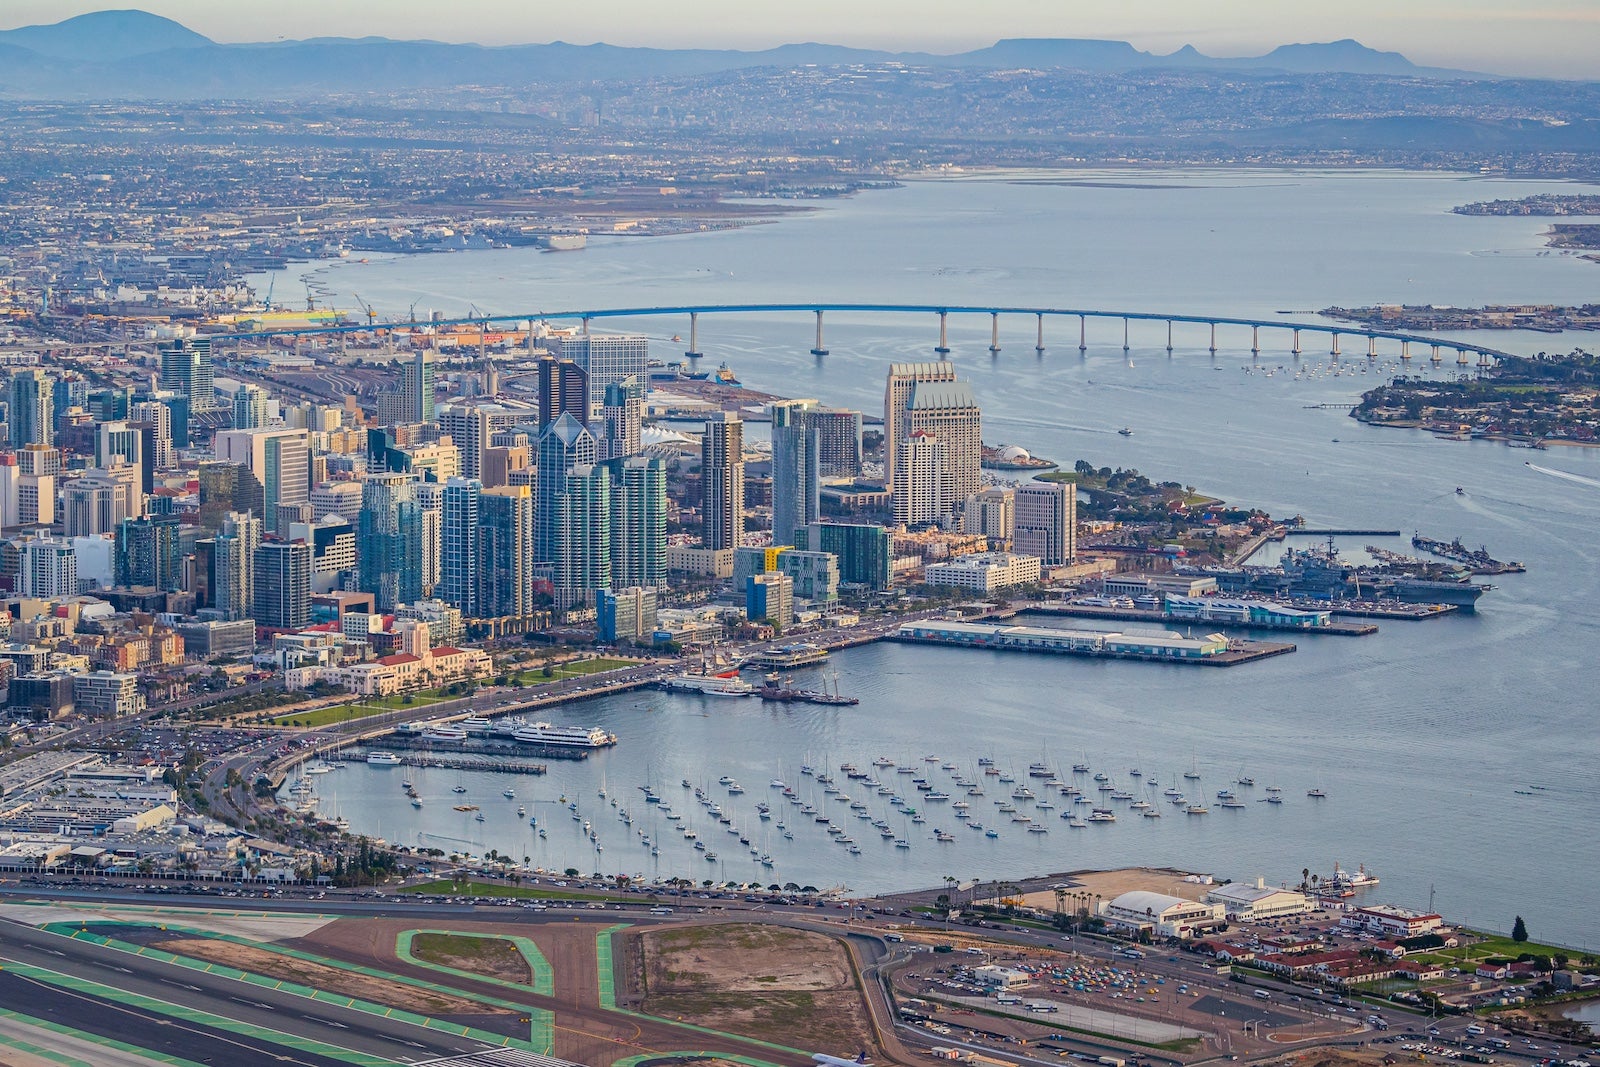 Arial view of San Diego, California